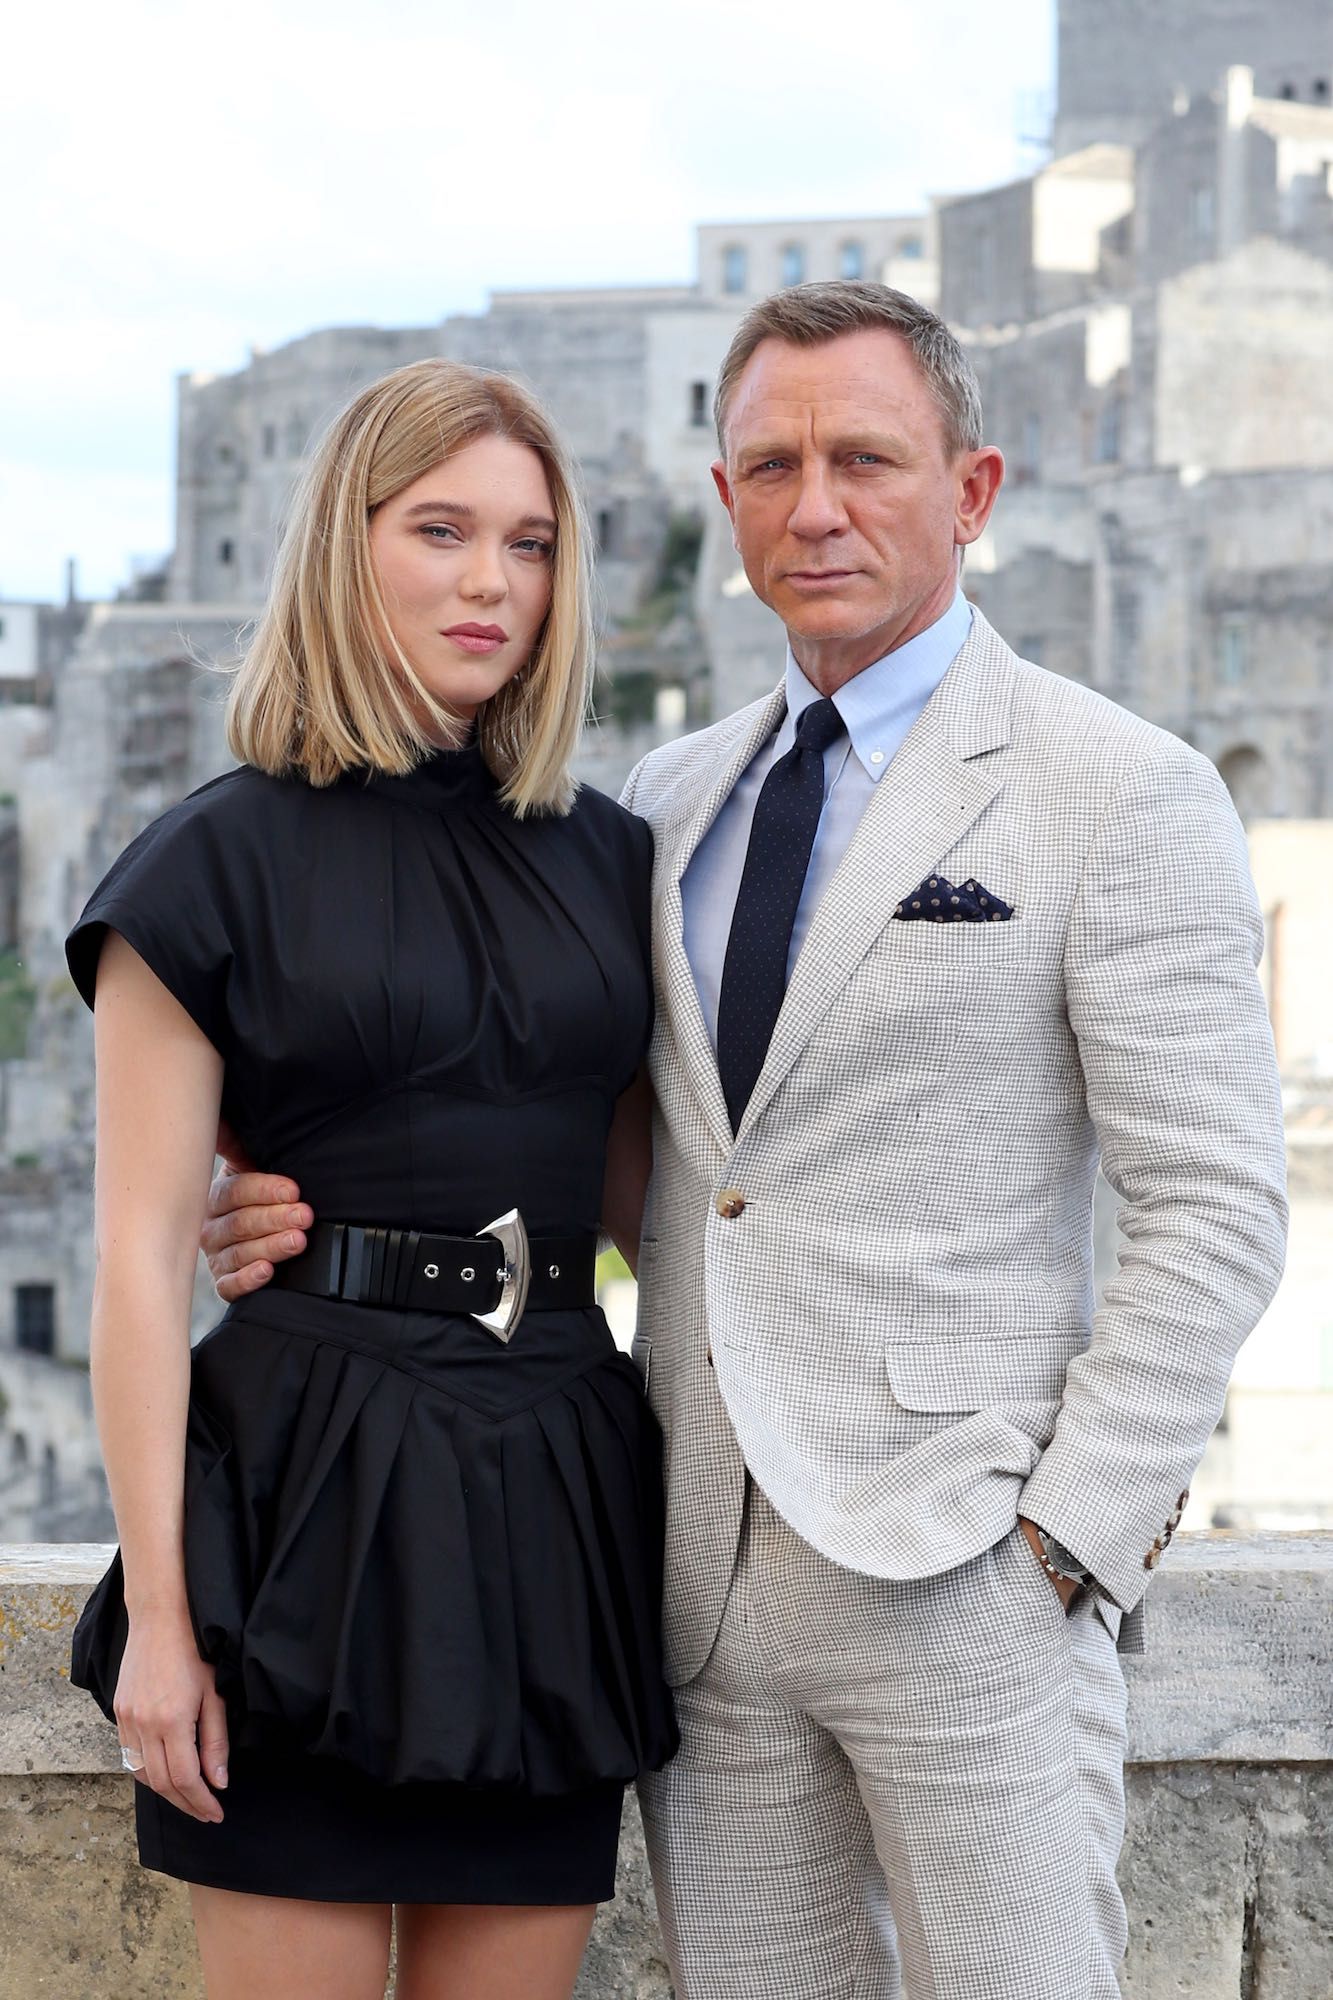 Lea Seydoux and Daniel Craig in Matera, Italy for new James Bond movie, No Time To Die